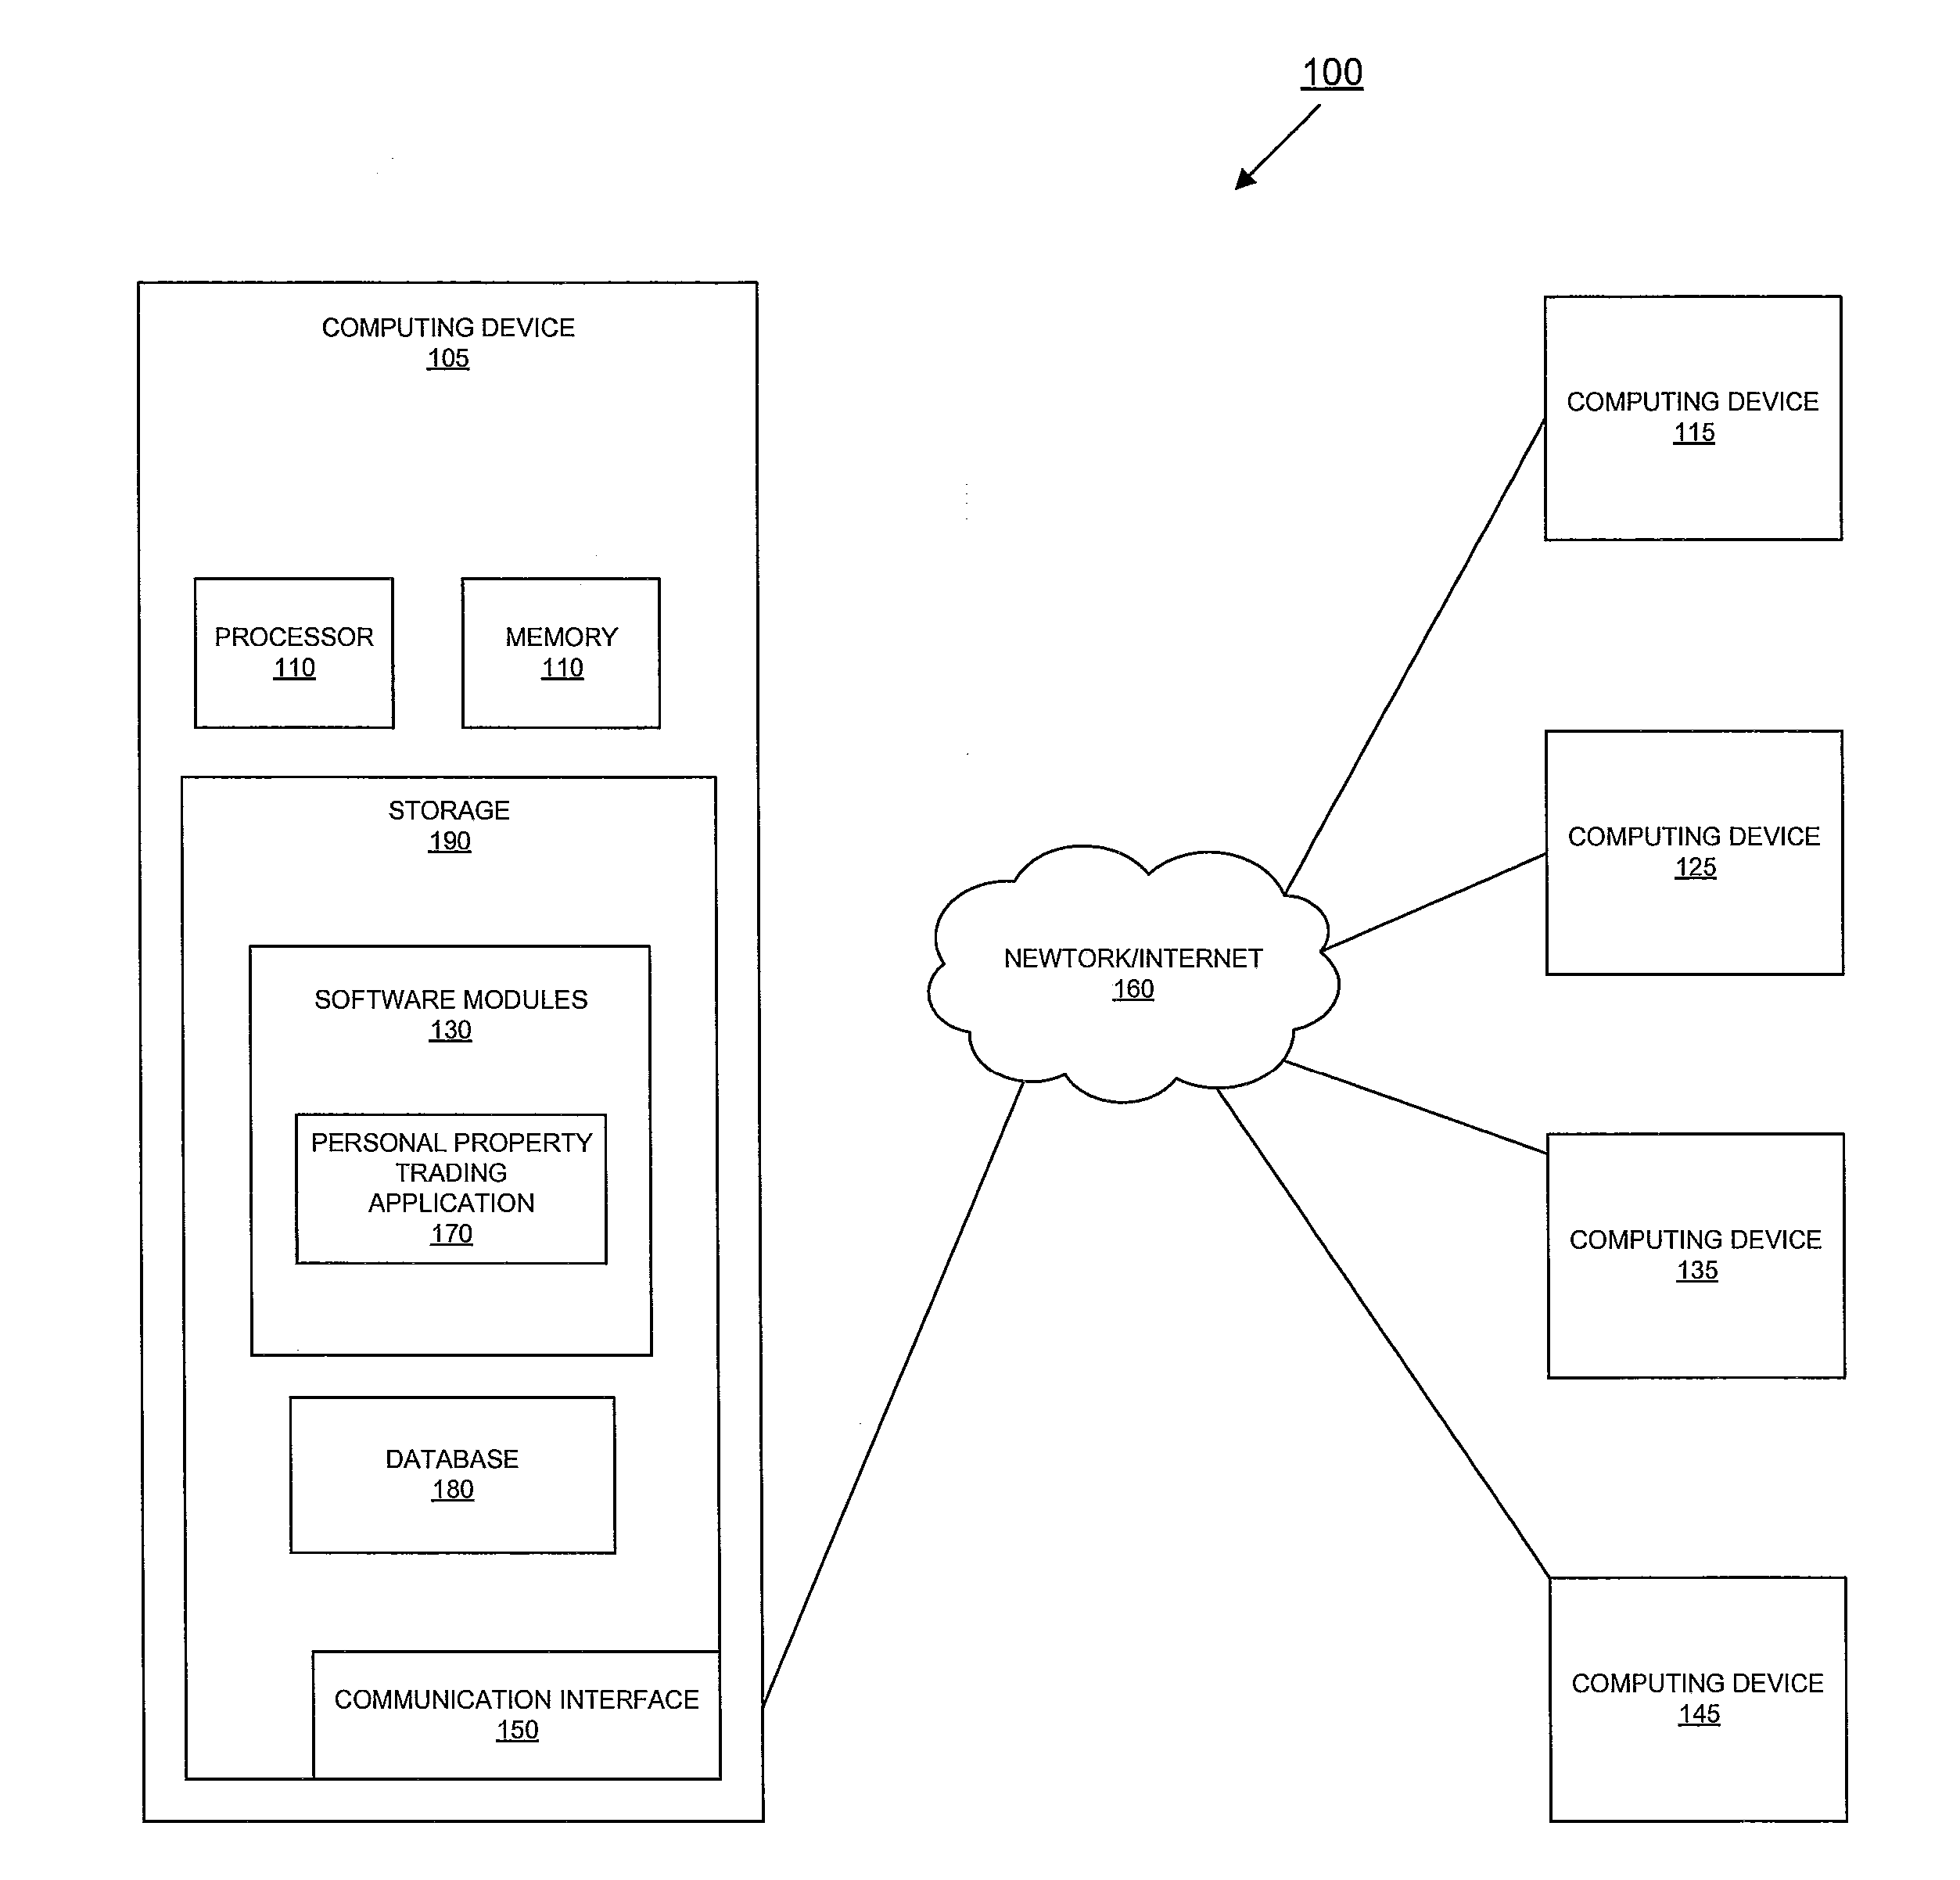 Systems and methods for a website application for the purpose of trading, bartering, swapping, or exchanging personal property through a social networking environment